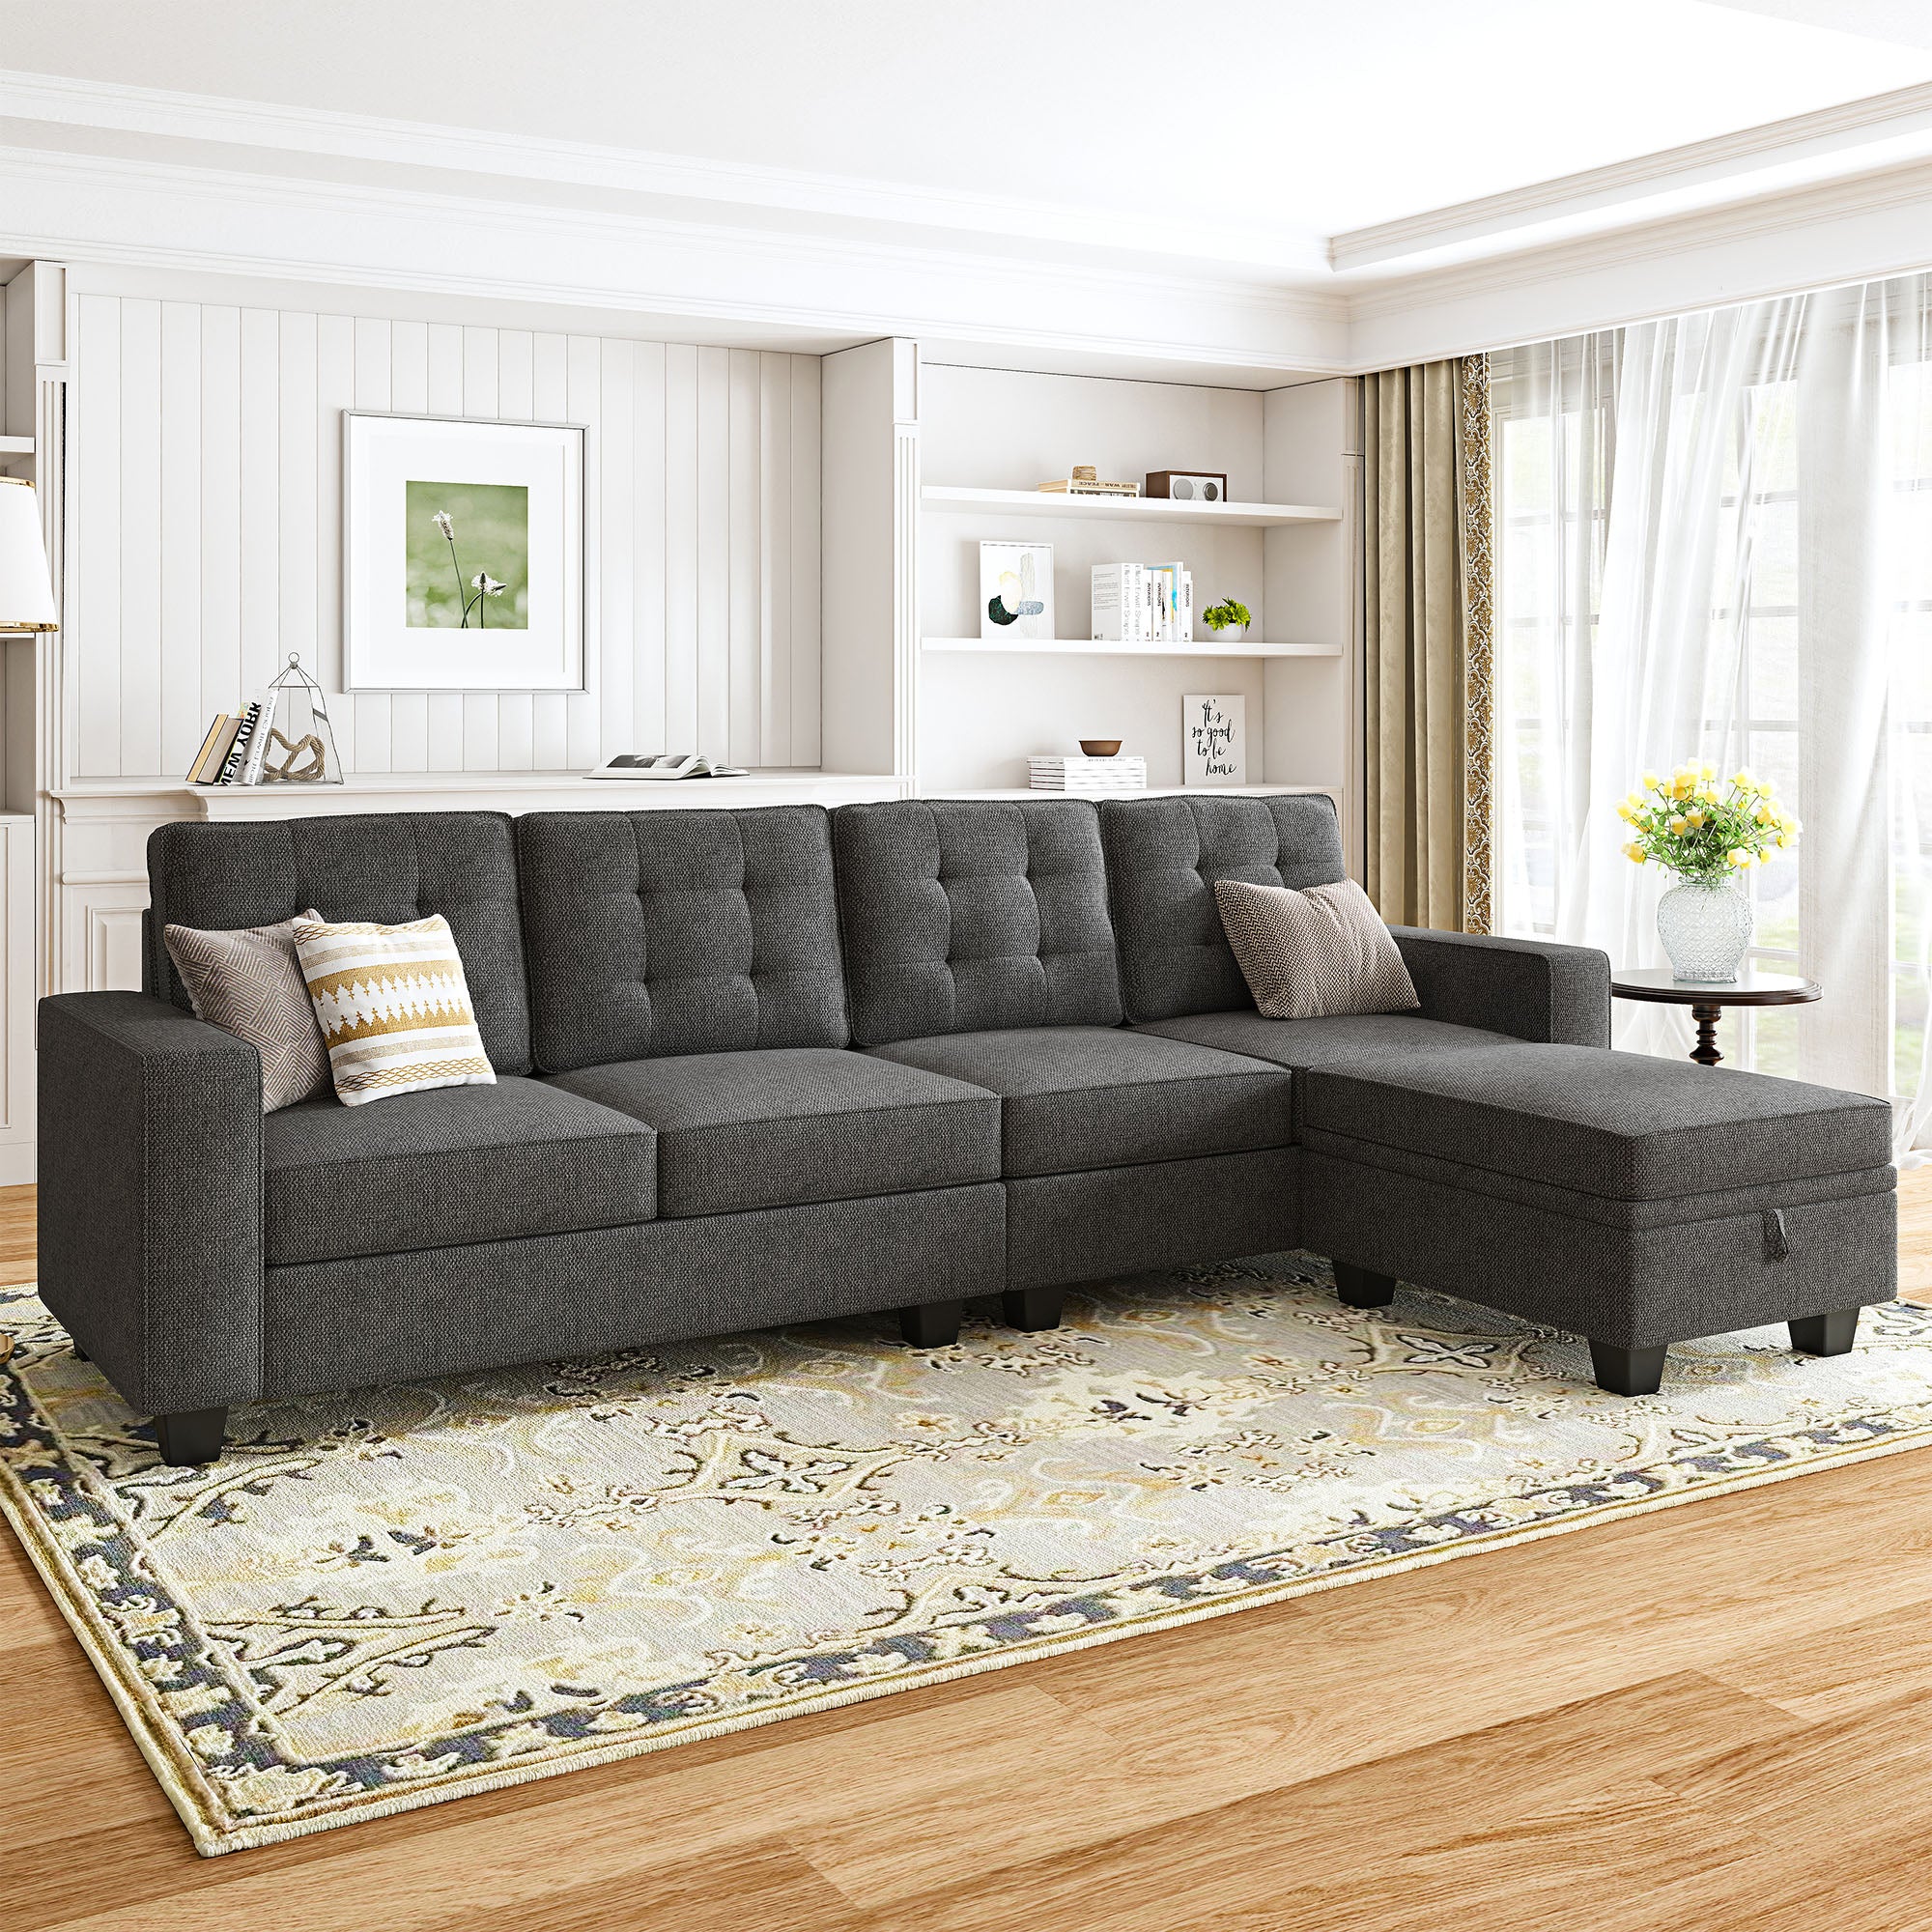 HONBAY 4-Seat Sectional Sofa Couch with Optional Extra Stoage Chaise&Ottoman